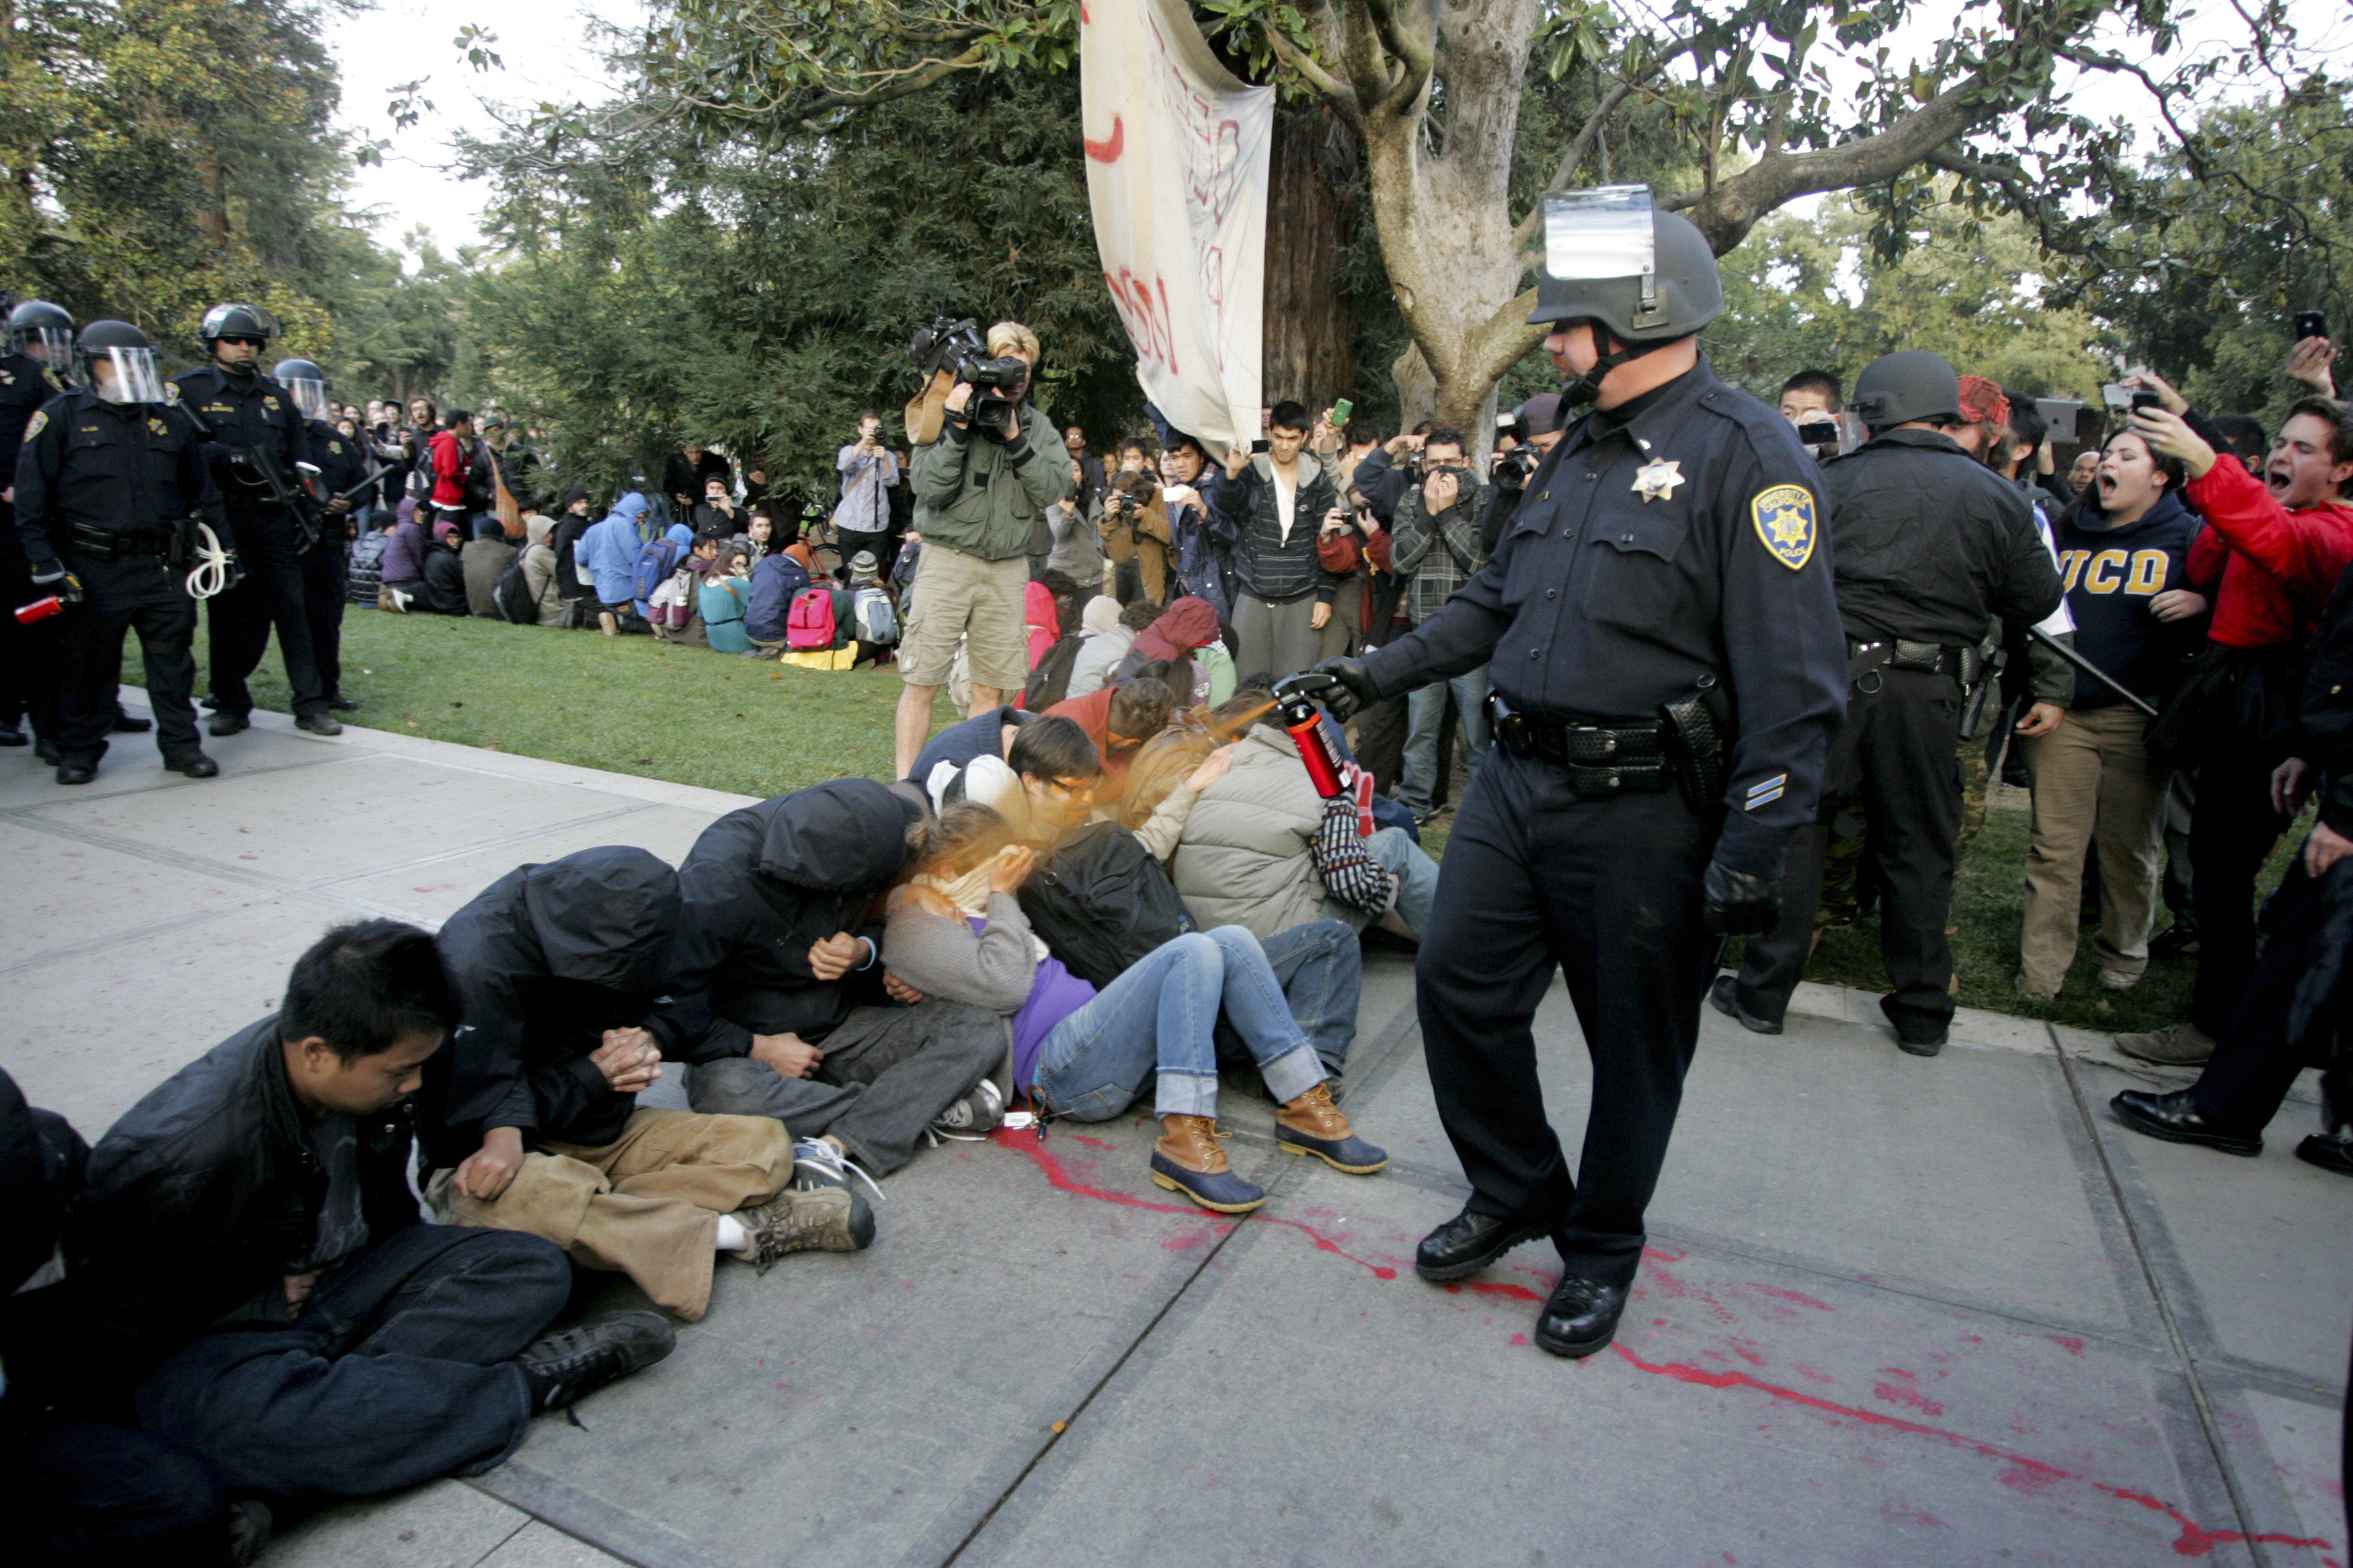 A University of California Davis police officer pepper-sprays students during their sit-in at an "Occupy UCD" demonstration in Davis, Calif. on Nov. 18, 2011. (Brian Nguyen—Reuters)